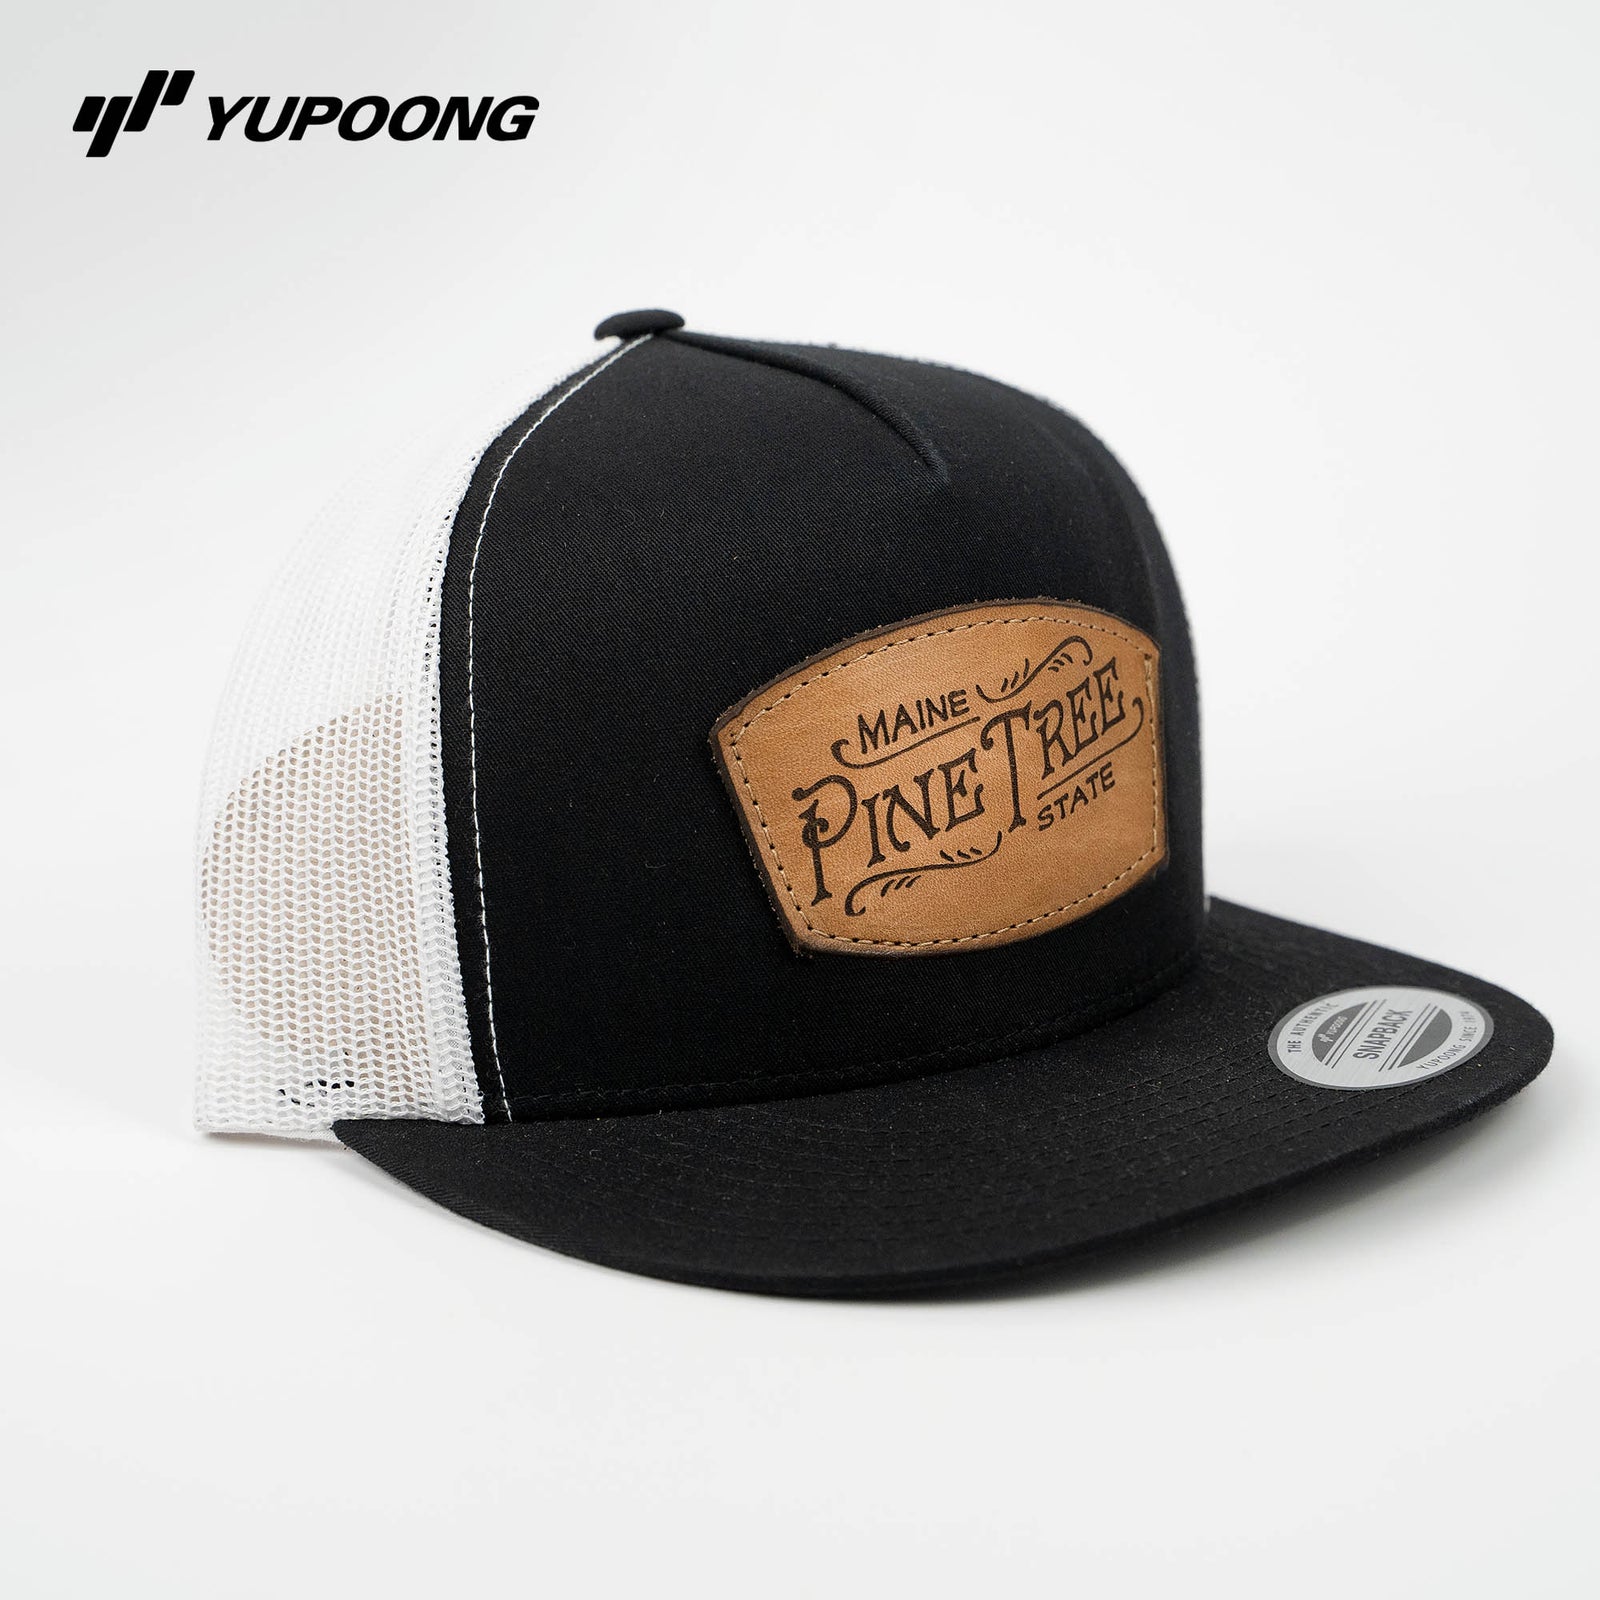 Lasered Leather Patch Trucker Mesh Snapback Hat ~ Yupoong 6006 Cap 